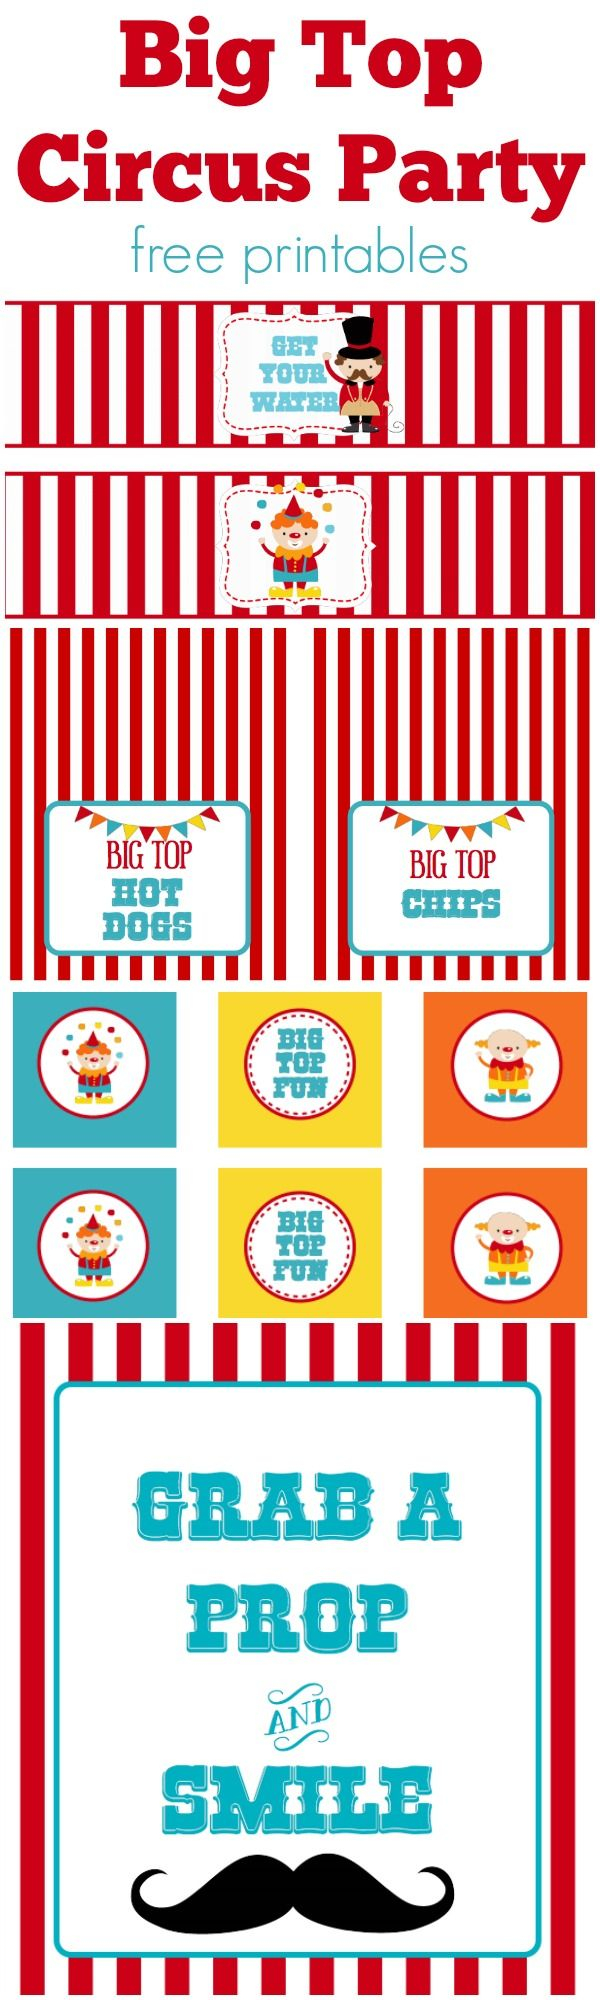 We Heart Parties Free Printables Big Top Circus Party Free Printables